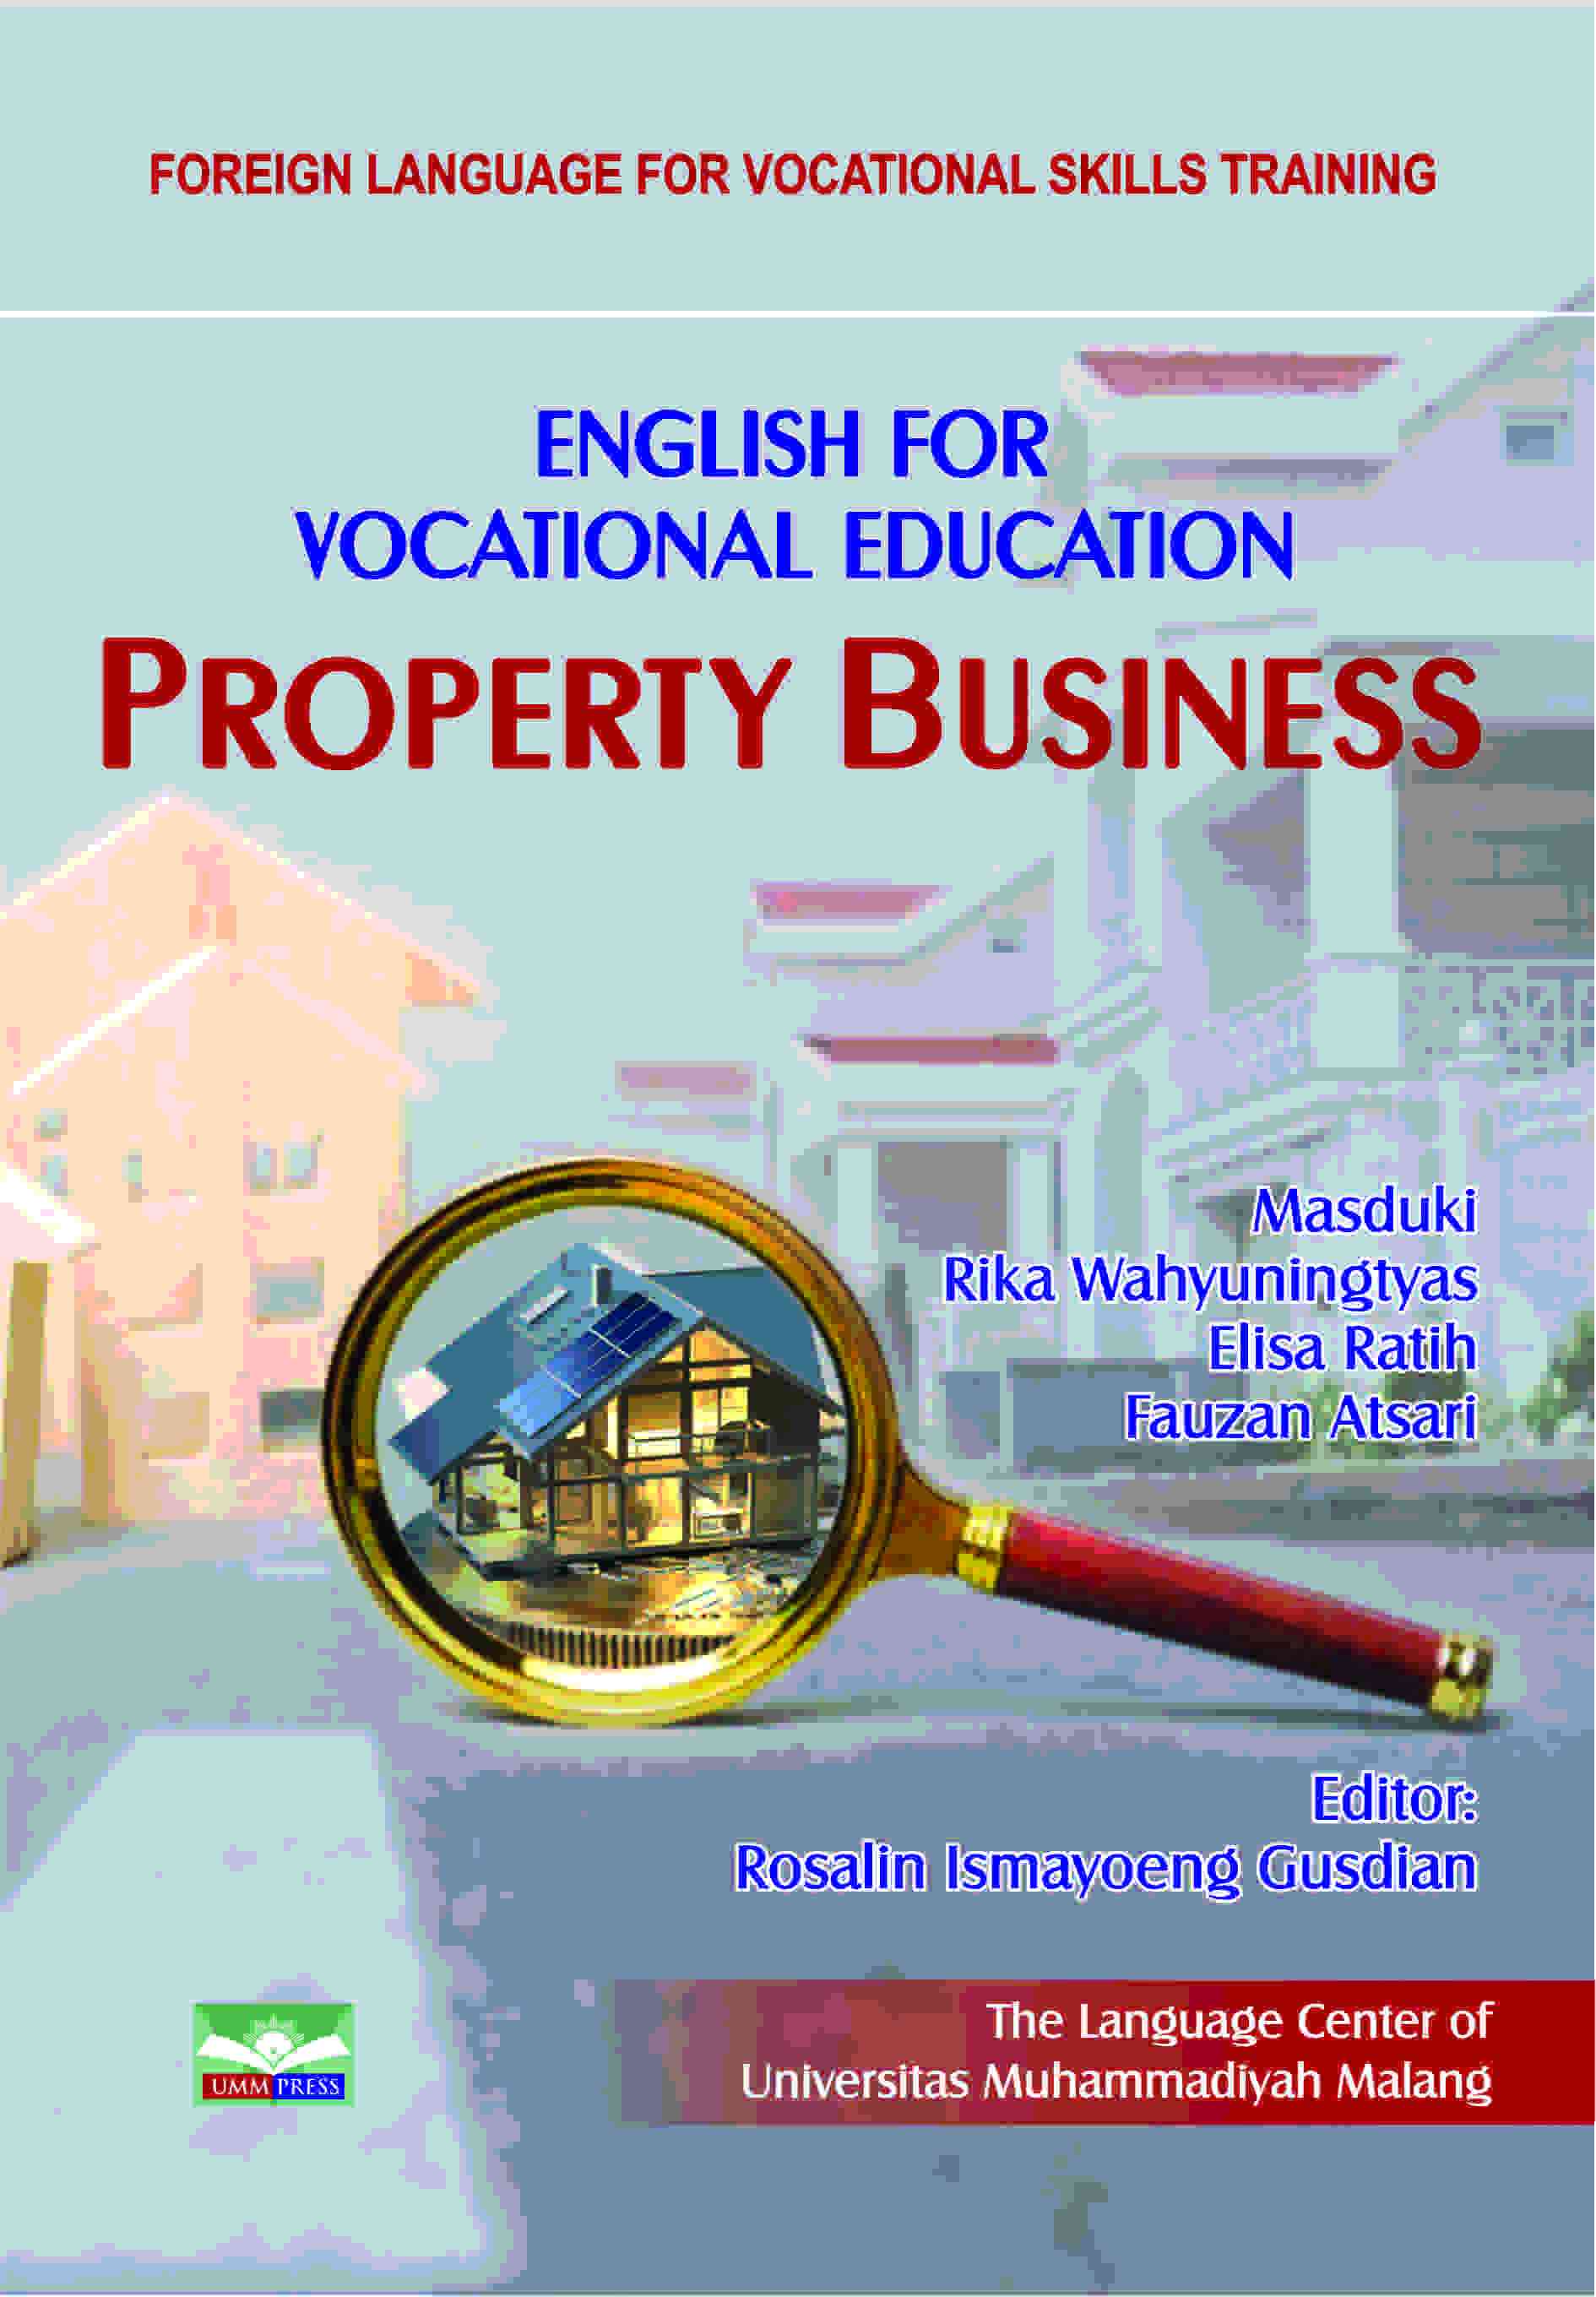 FLVST - ENGLISH FOR VOCATIONAL EDUCATION PROPERTY BUSINESS